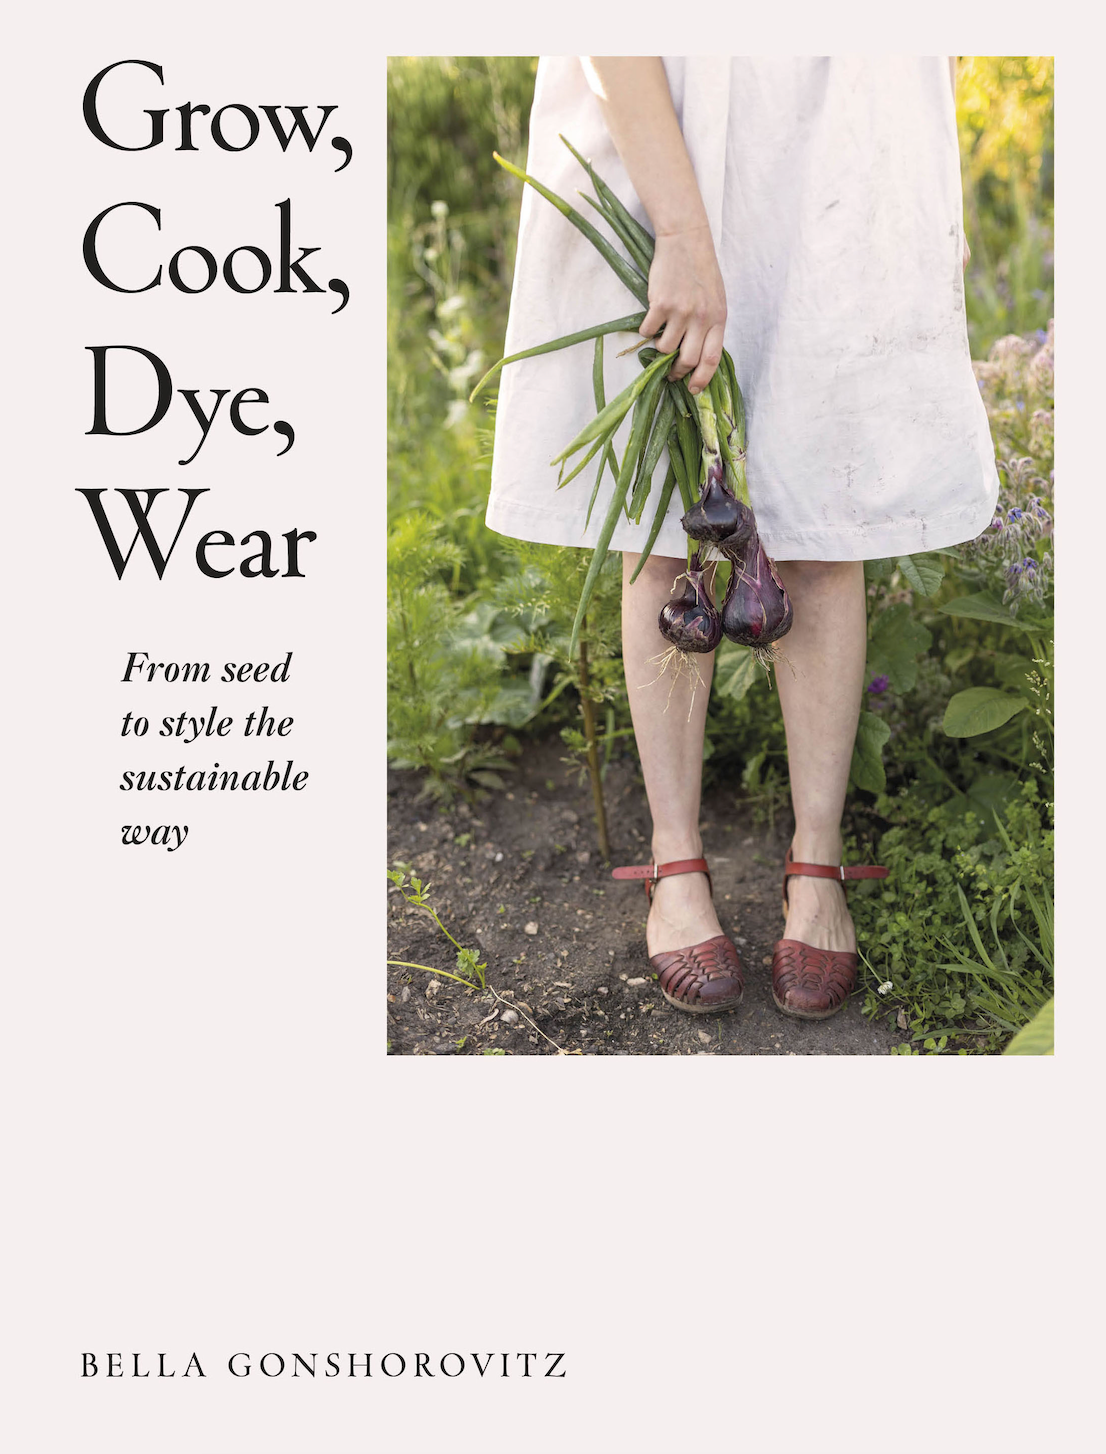 Grow, Cook, Dye, Wear | From Seed To Style The Sustainable Way